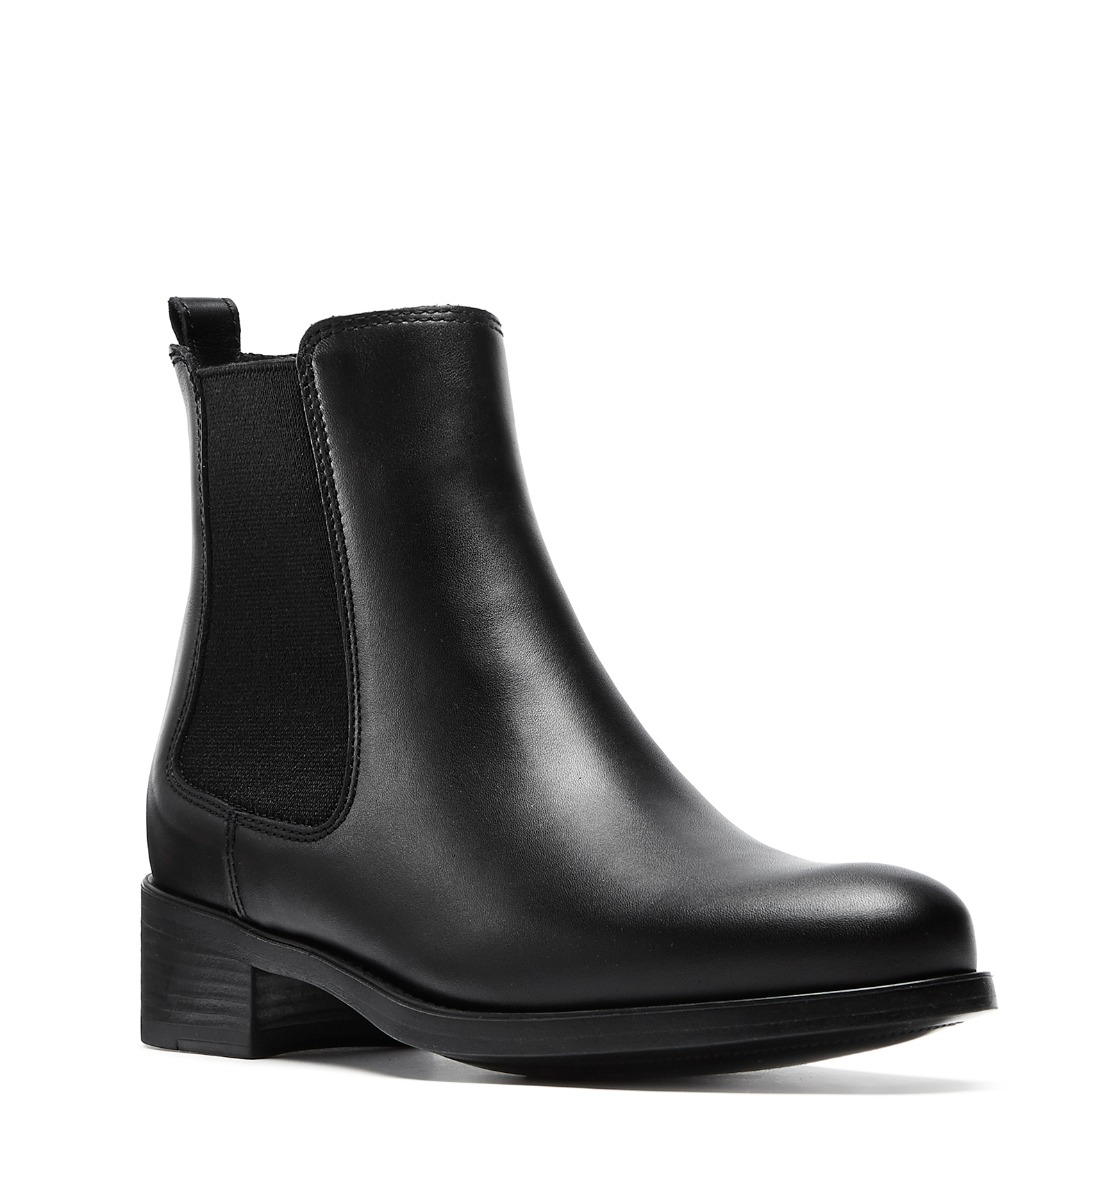 Black leather Chelsea boots for women Carla - Total comfort